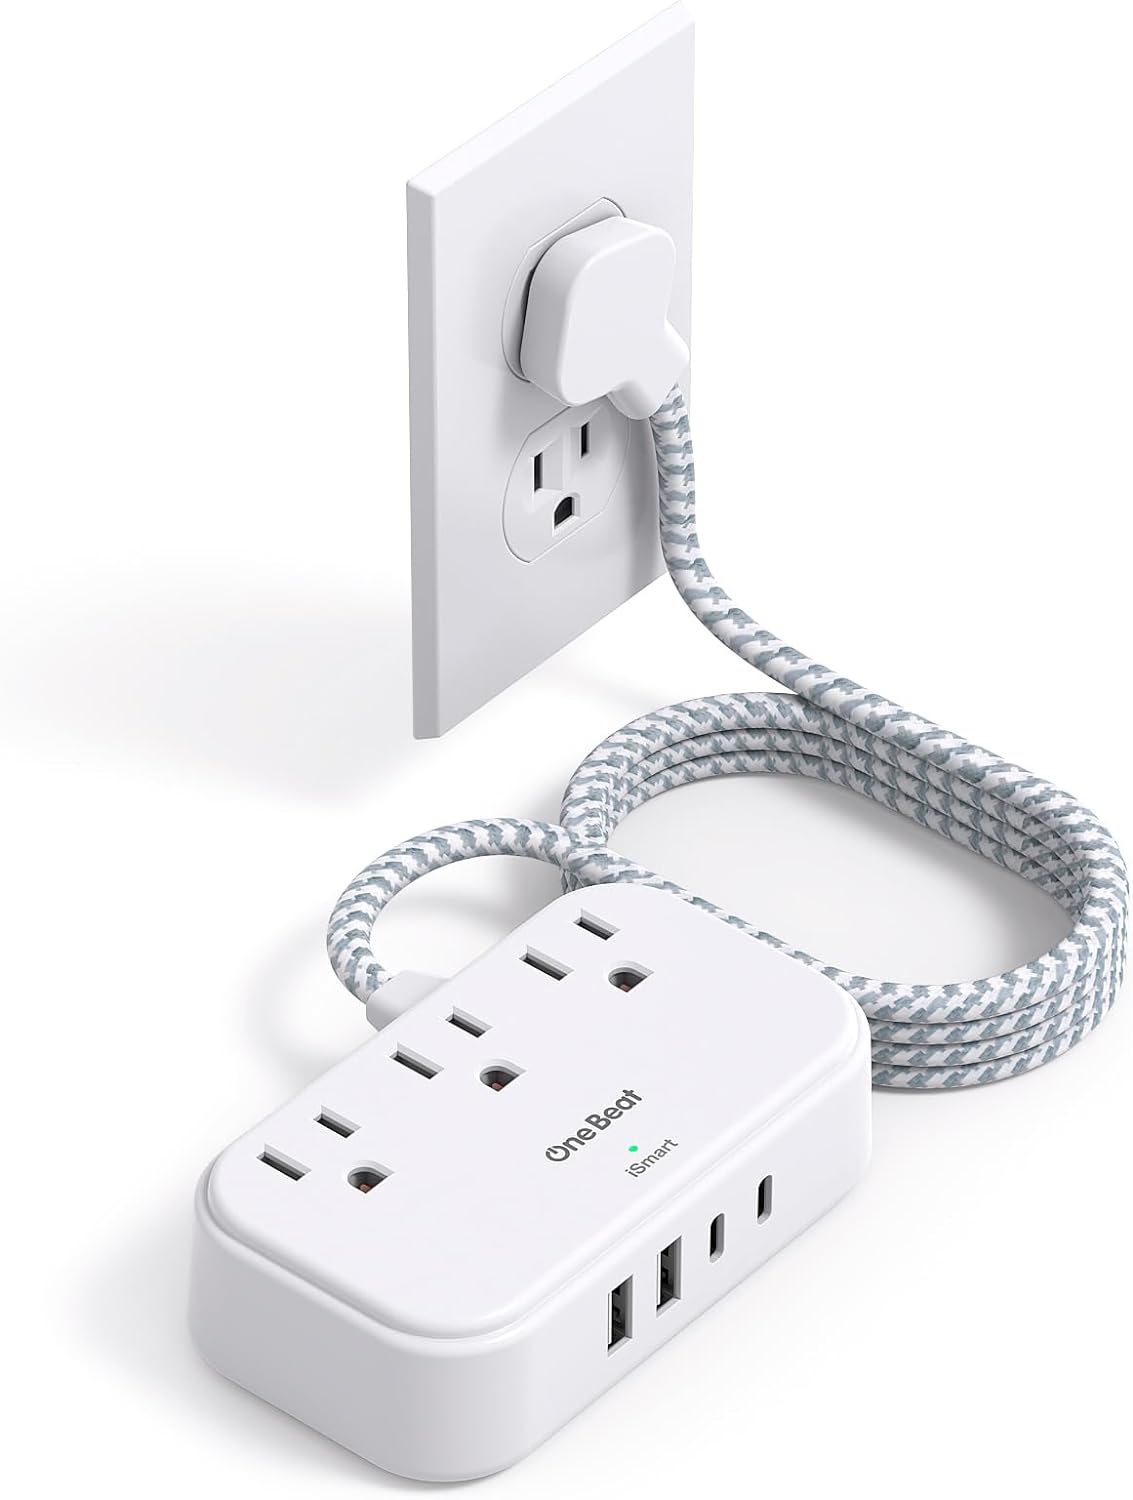 5 Ft Flat Extension Cord, 3 Outlets 4 USB Ports(2 USB C) Flat Plug Power Strip, USB Charging Station with Non Surge Protector for Cruise Ship, Travel, Dorm Room Essentials.【7 in 1 Travel Power Strip with USB Charge Port】The Flat Extension Cord could turn 1 sockets into 3 outlets 4 USB, which could charge up to 7 devices at the same time. It could charge your cellphone, laptop, tablet, cameras without a variety of converters, save your space and make your desktop organize; With 4 anti-slip rubbers bottom, the power strip can be stable on your desktop or nightstand without slipping off, is suitable for home, office, and college dorm room.【Flat Plug Power Strip with 5ft Braided Cord】Our low profile powerstrip can fit behind dressers with 0.35” ultra thin flat wall plug design, It’s also angled at 45 degrees to help avoid blocking adjoining outlets. Other than using it for travel must have, this extension cord with multiple outlets can also be used in the home, office, guest room and camper van, or as apartment essentials for first apartment, college dorm room essentials.【2 x USB C Power Strip】 One Beat USB charging station designed extra 2 USB type C ports so your USB-C cords don't need adapters, the USB C port can charge up to 5V/3A. the 2 regular USB-A ports can charge up to 5V/2.4A Max, all 4 USB Ports Output is 5V/3.1A, 15.5W max which charging faster than other power strip.【Cruise Ship & Dorm Room Essentials】Non Surge Protector Power plug is compact and lightweight, the 4 rubber feet on the bottom keep from slipping and can be stable on the any table.NO surge protection, it’s definitely a must have cruise ship accessories. Ideal for multiple devices charge together, Whether as a desktop power strip or a nightstand charging station, it can be competent.【Multiple Safety Protection & After Service】RoHS, ETL Certificates. This power strip has overload protection, short-circuit protection, over current protection, over-voltage protection and overheating protection. Environmental protection and fire-resistance PC shell with flame retardant at 1382℉ makes it more durable and longer lifetime.（One Beat provides 12-month free worry. 24h customer service.)